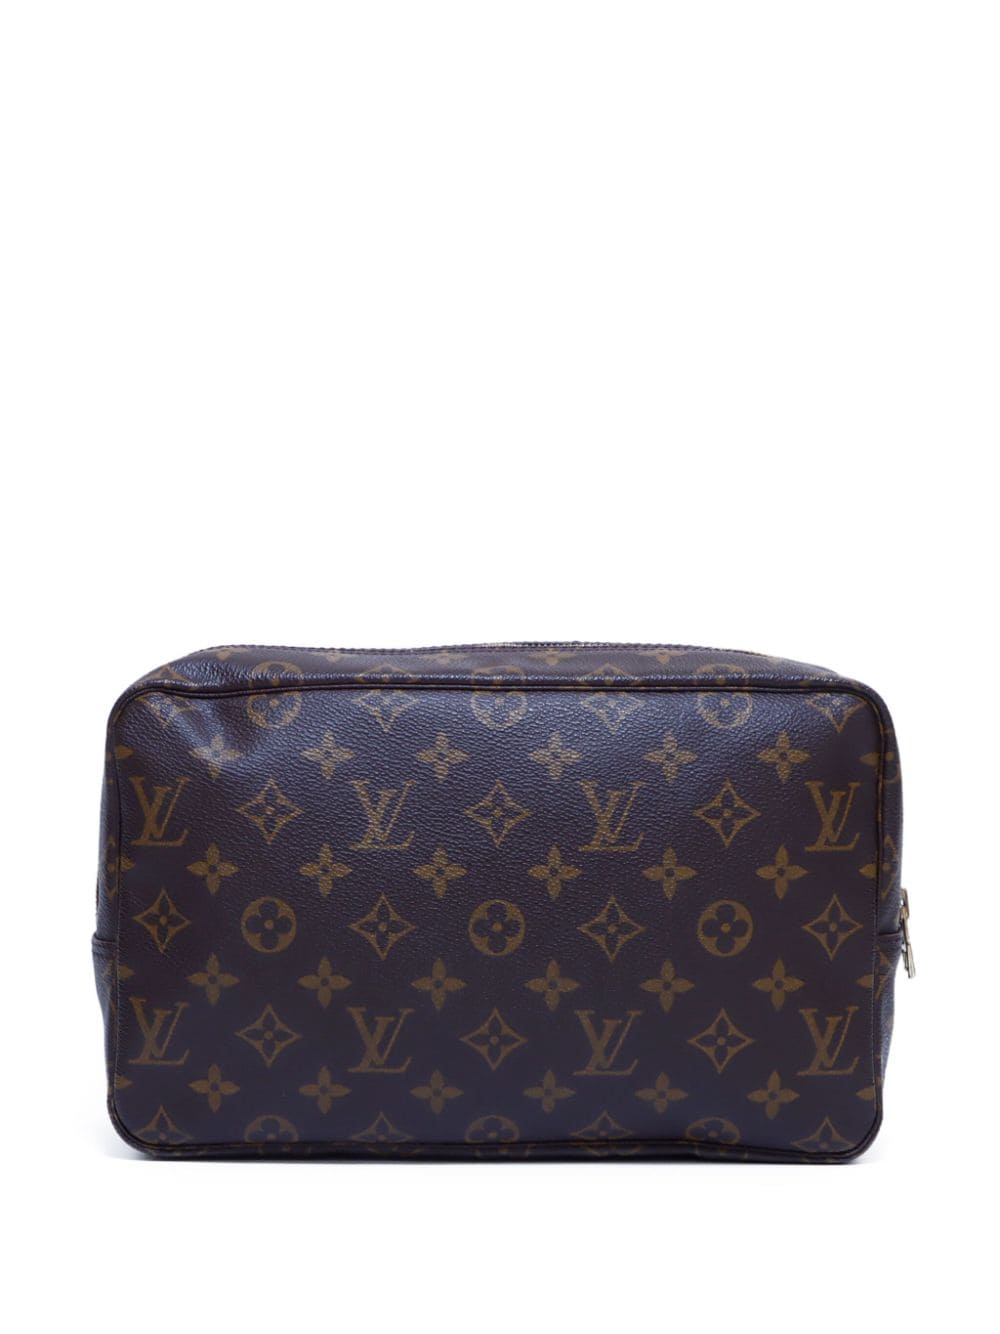 Image 2 of Louis Vuitton Pre-Owned 2009 Trousse 28 cosmetic pouch